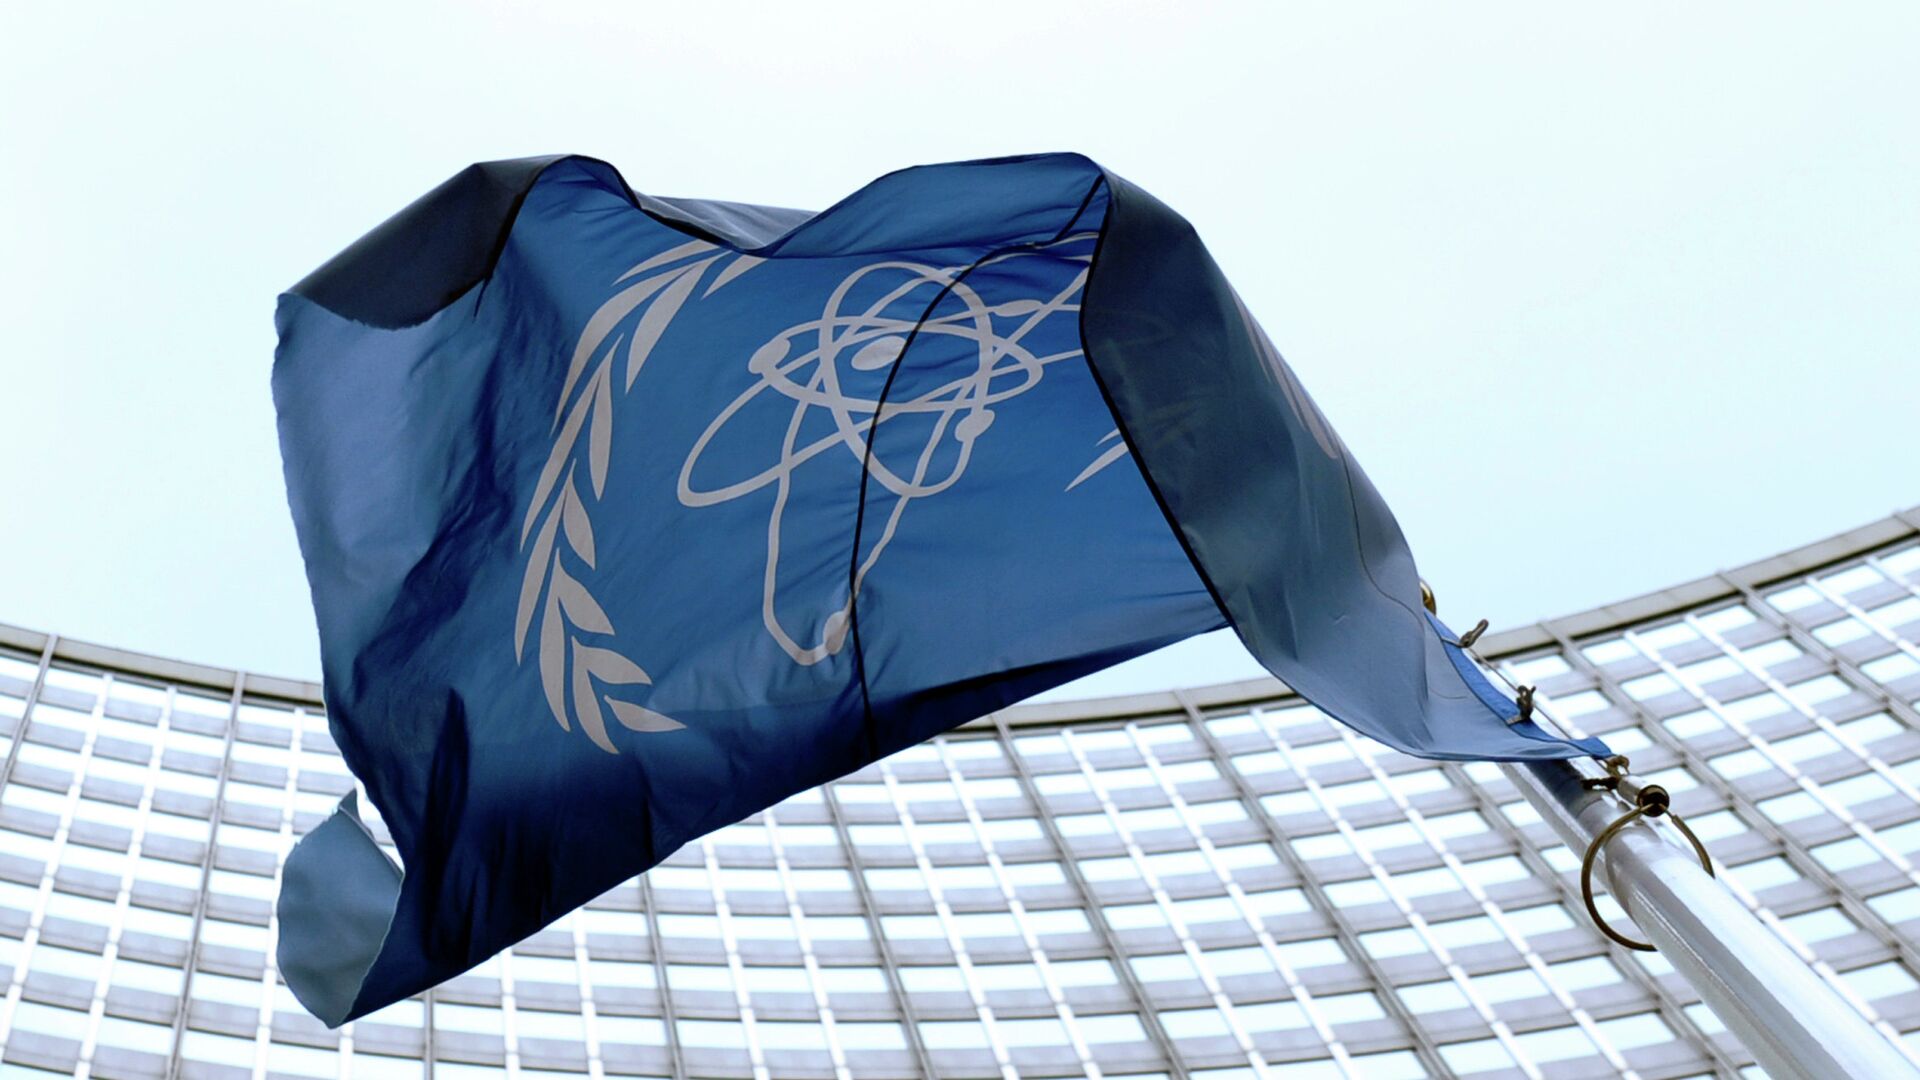 The flag of the International Atomic Energy Agency (IAEA) flies in front of the Vienna headquarters at the Vienna International Center. (File) - اسپوتنیک افغانستان  , 1920, 01.09.2022